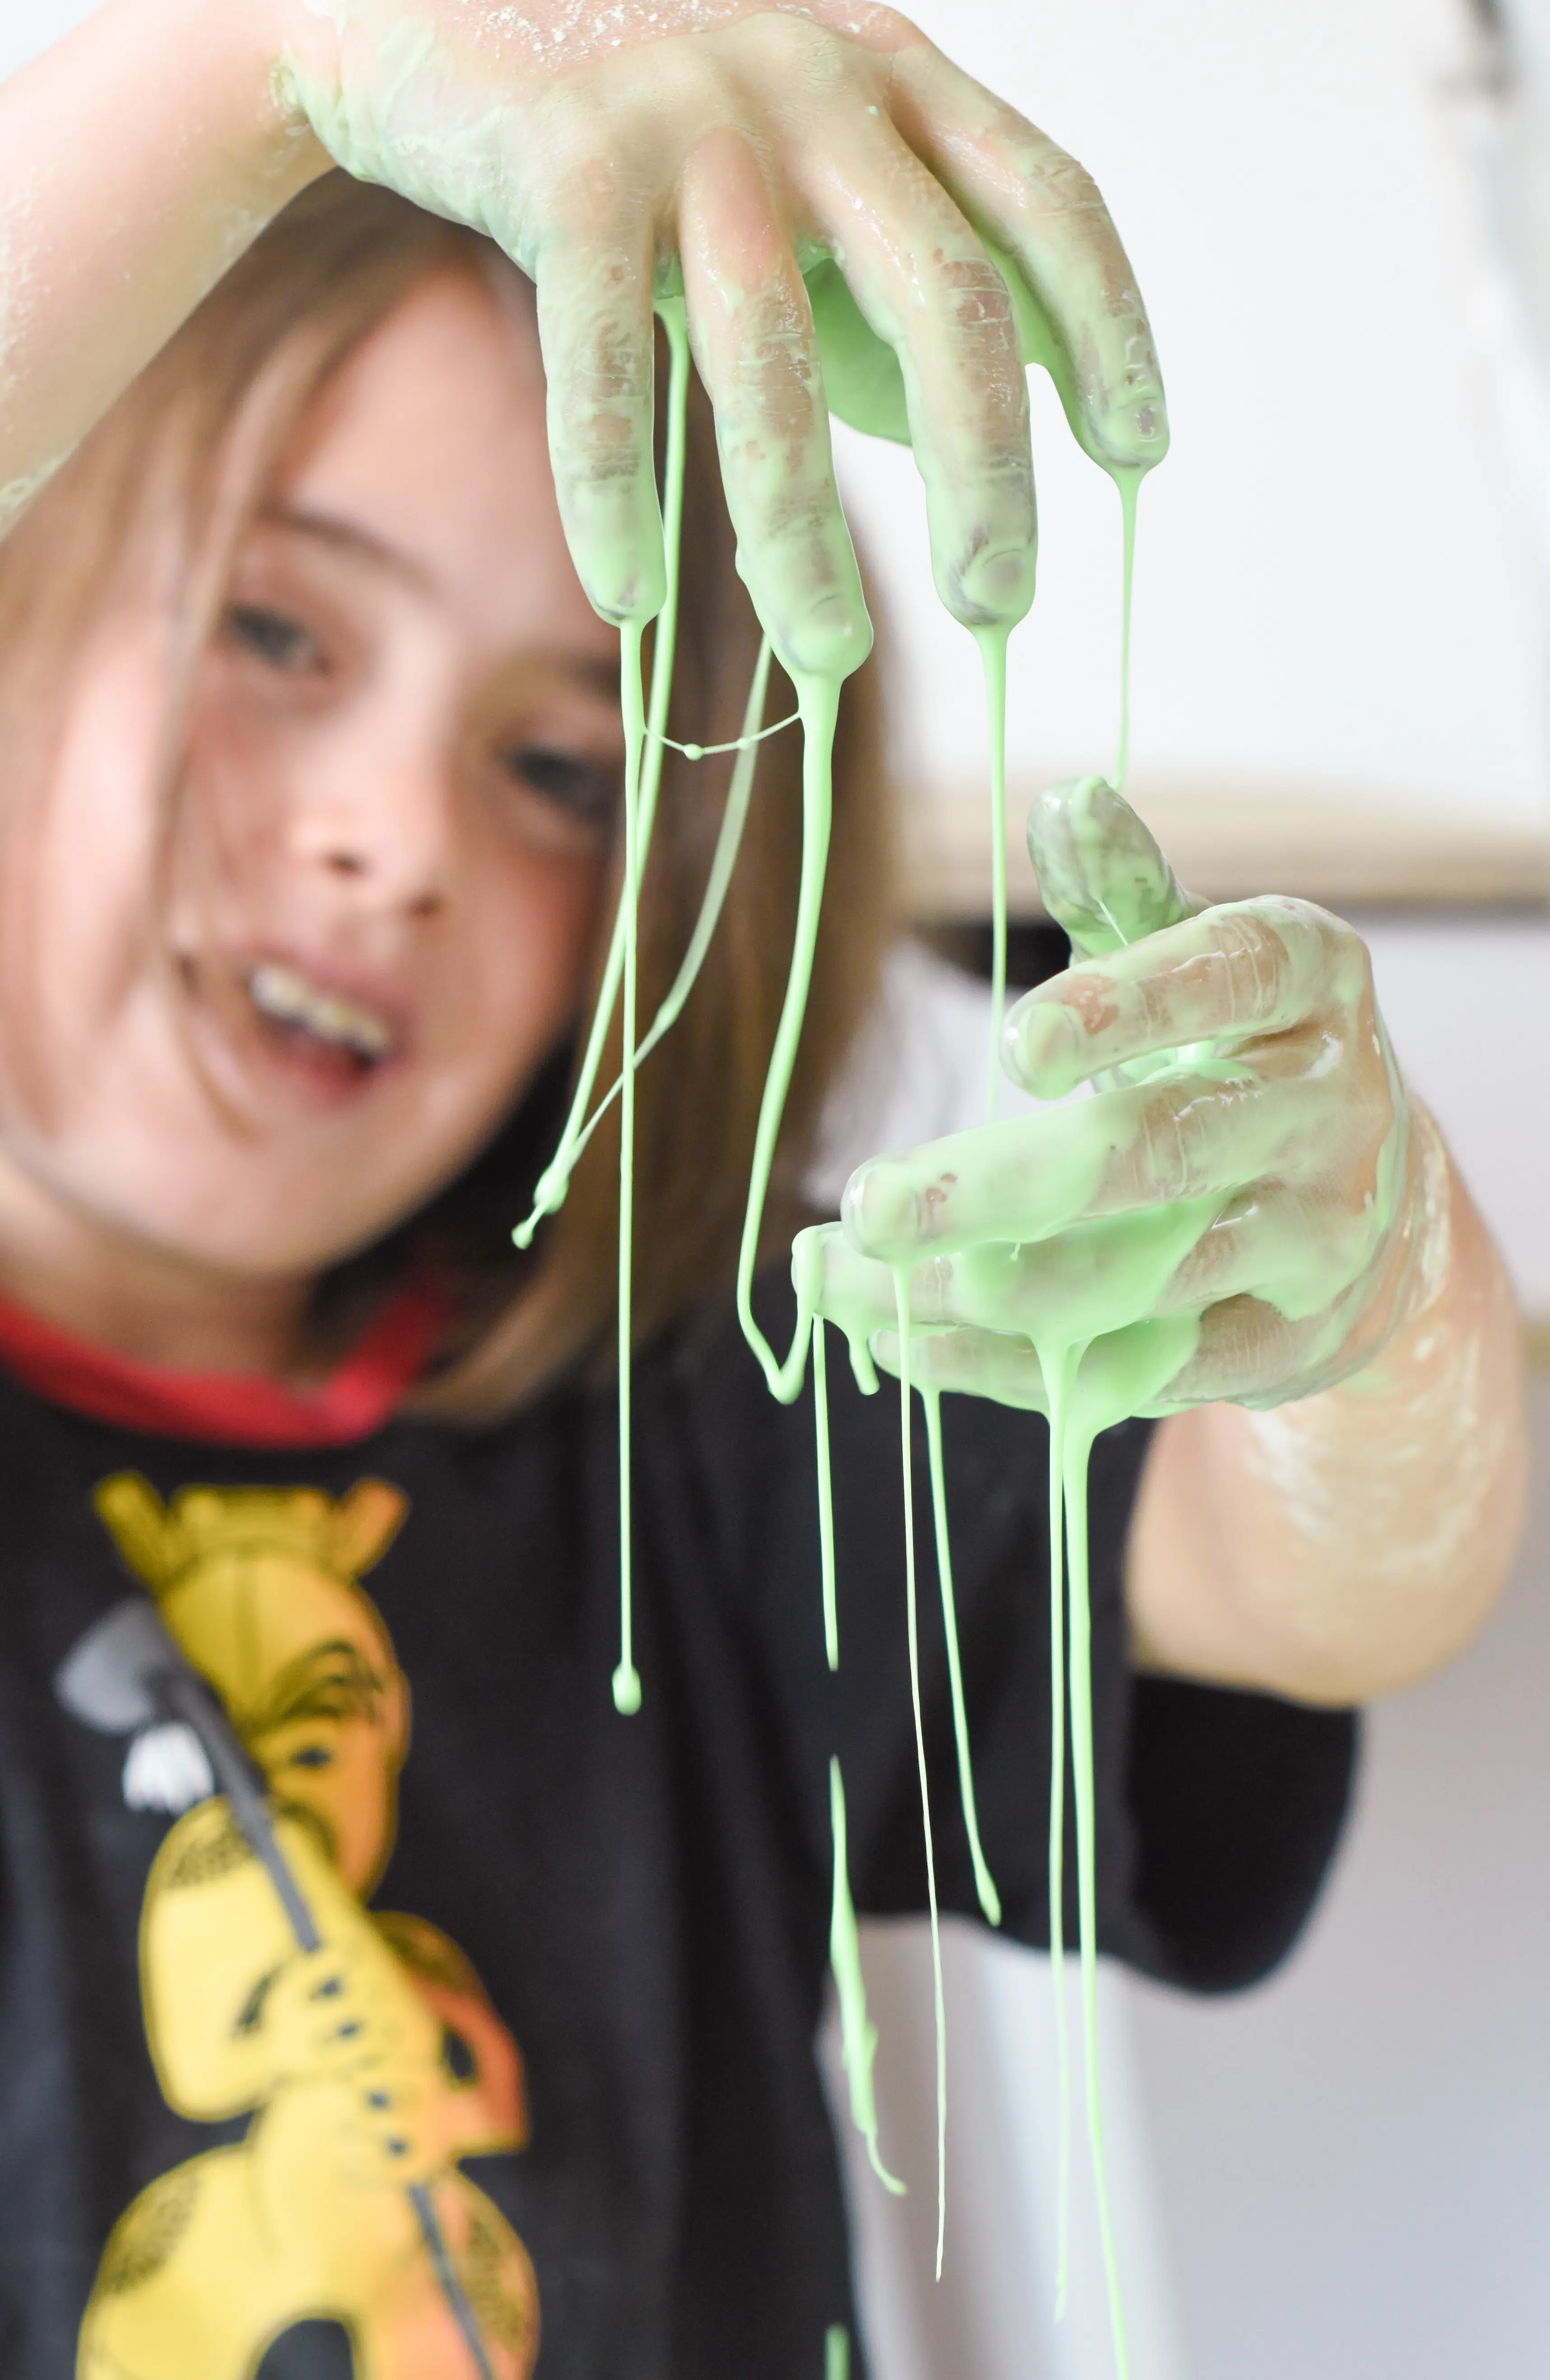 Is Oobleck liquid or solid